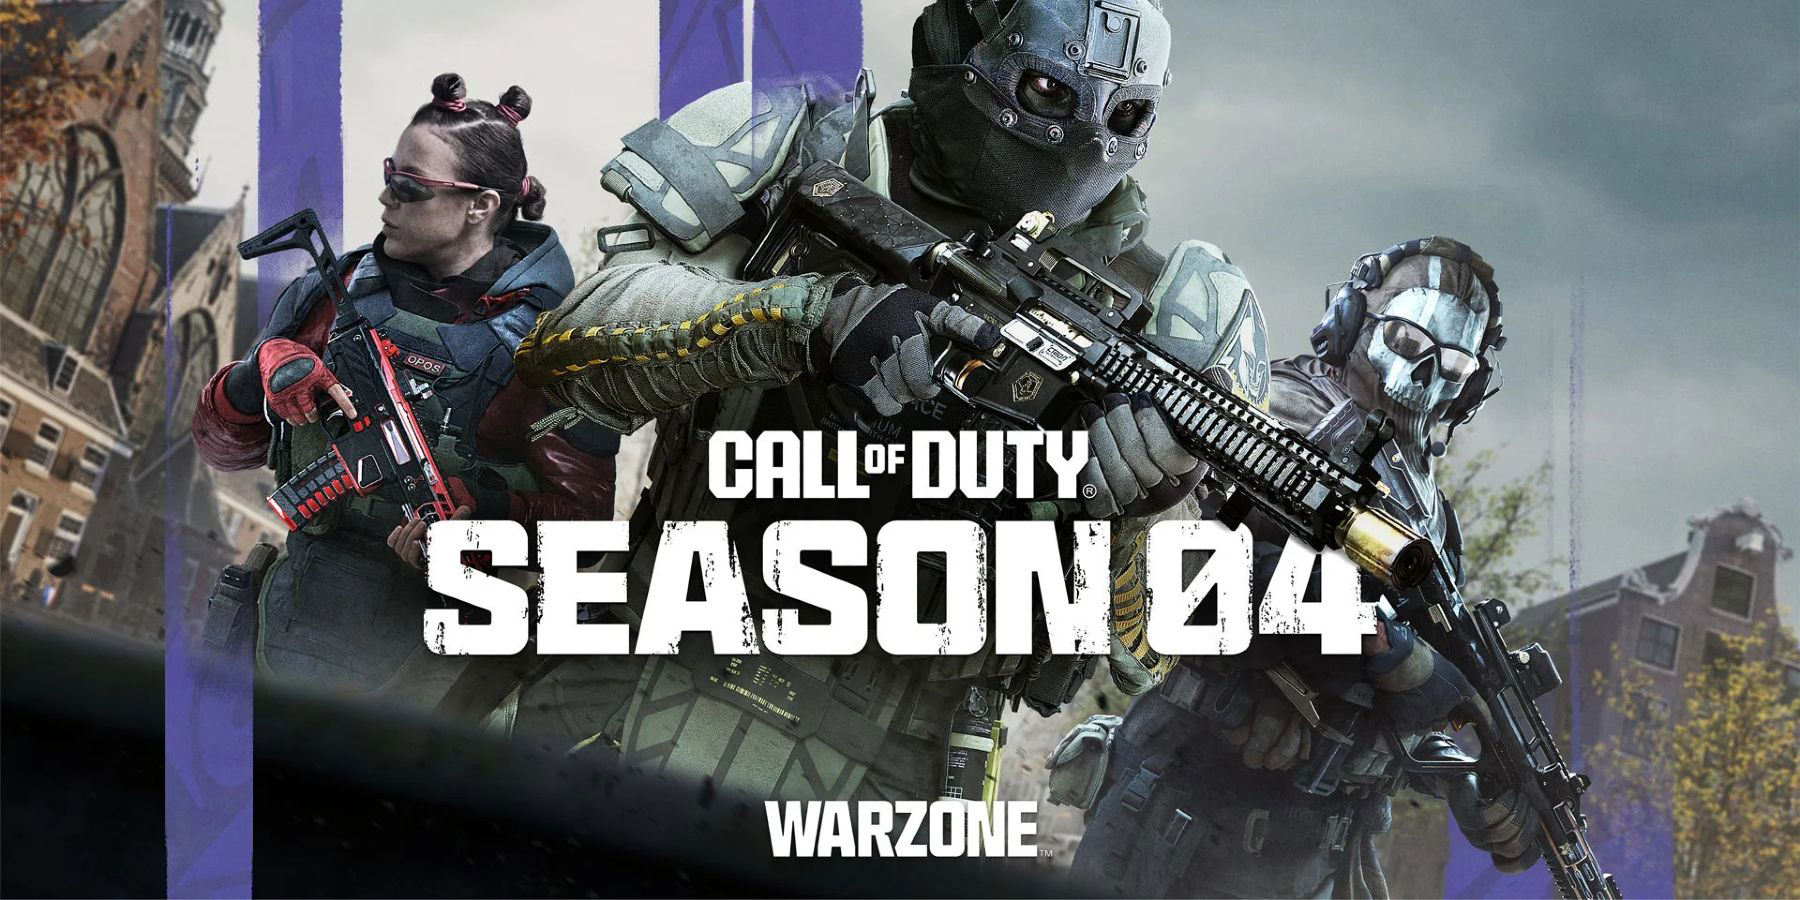 Call of Duty Warzone's Big Season 4 Changes May Be Too Little, Too Late